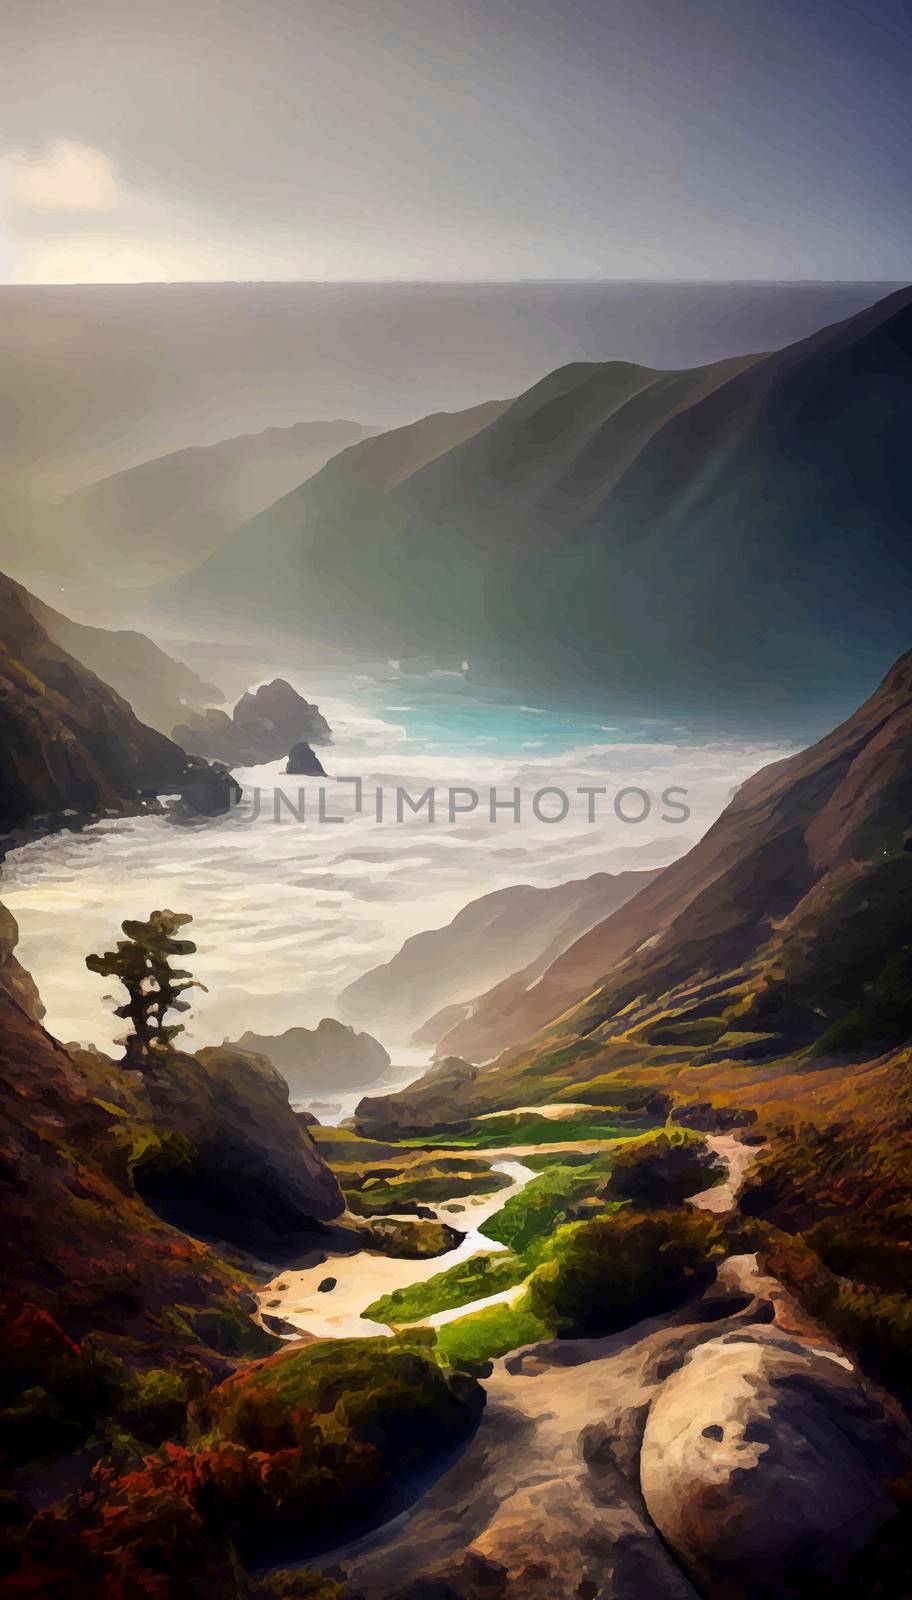 Illustration of peaceful landscape with a natural setting, cinematic and beautiful landscape illustration. by JpRamos